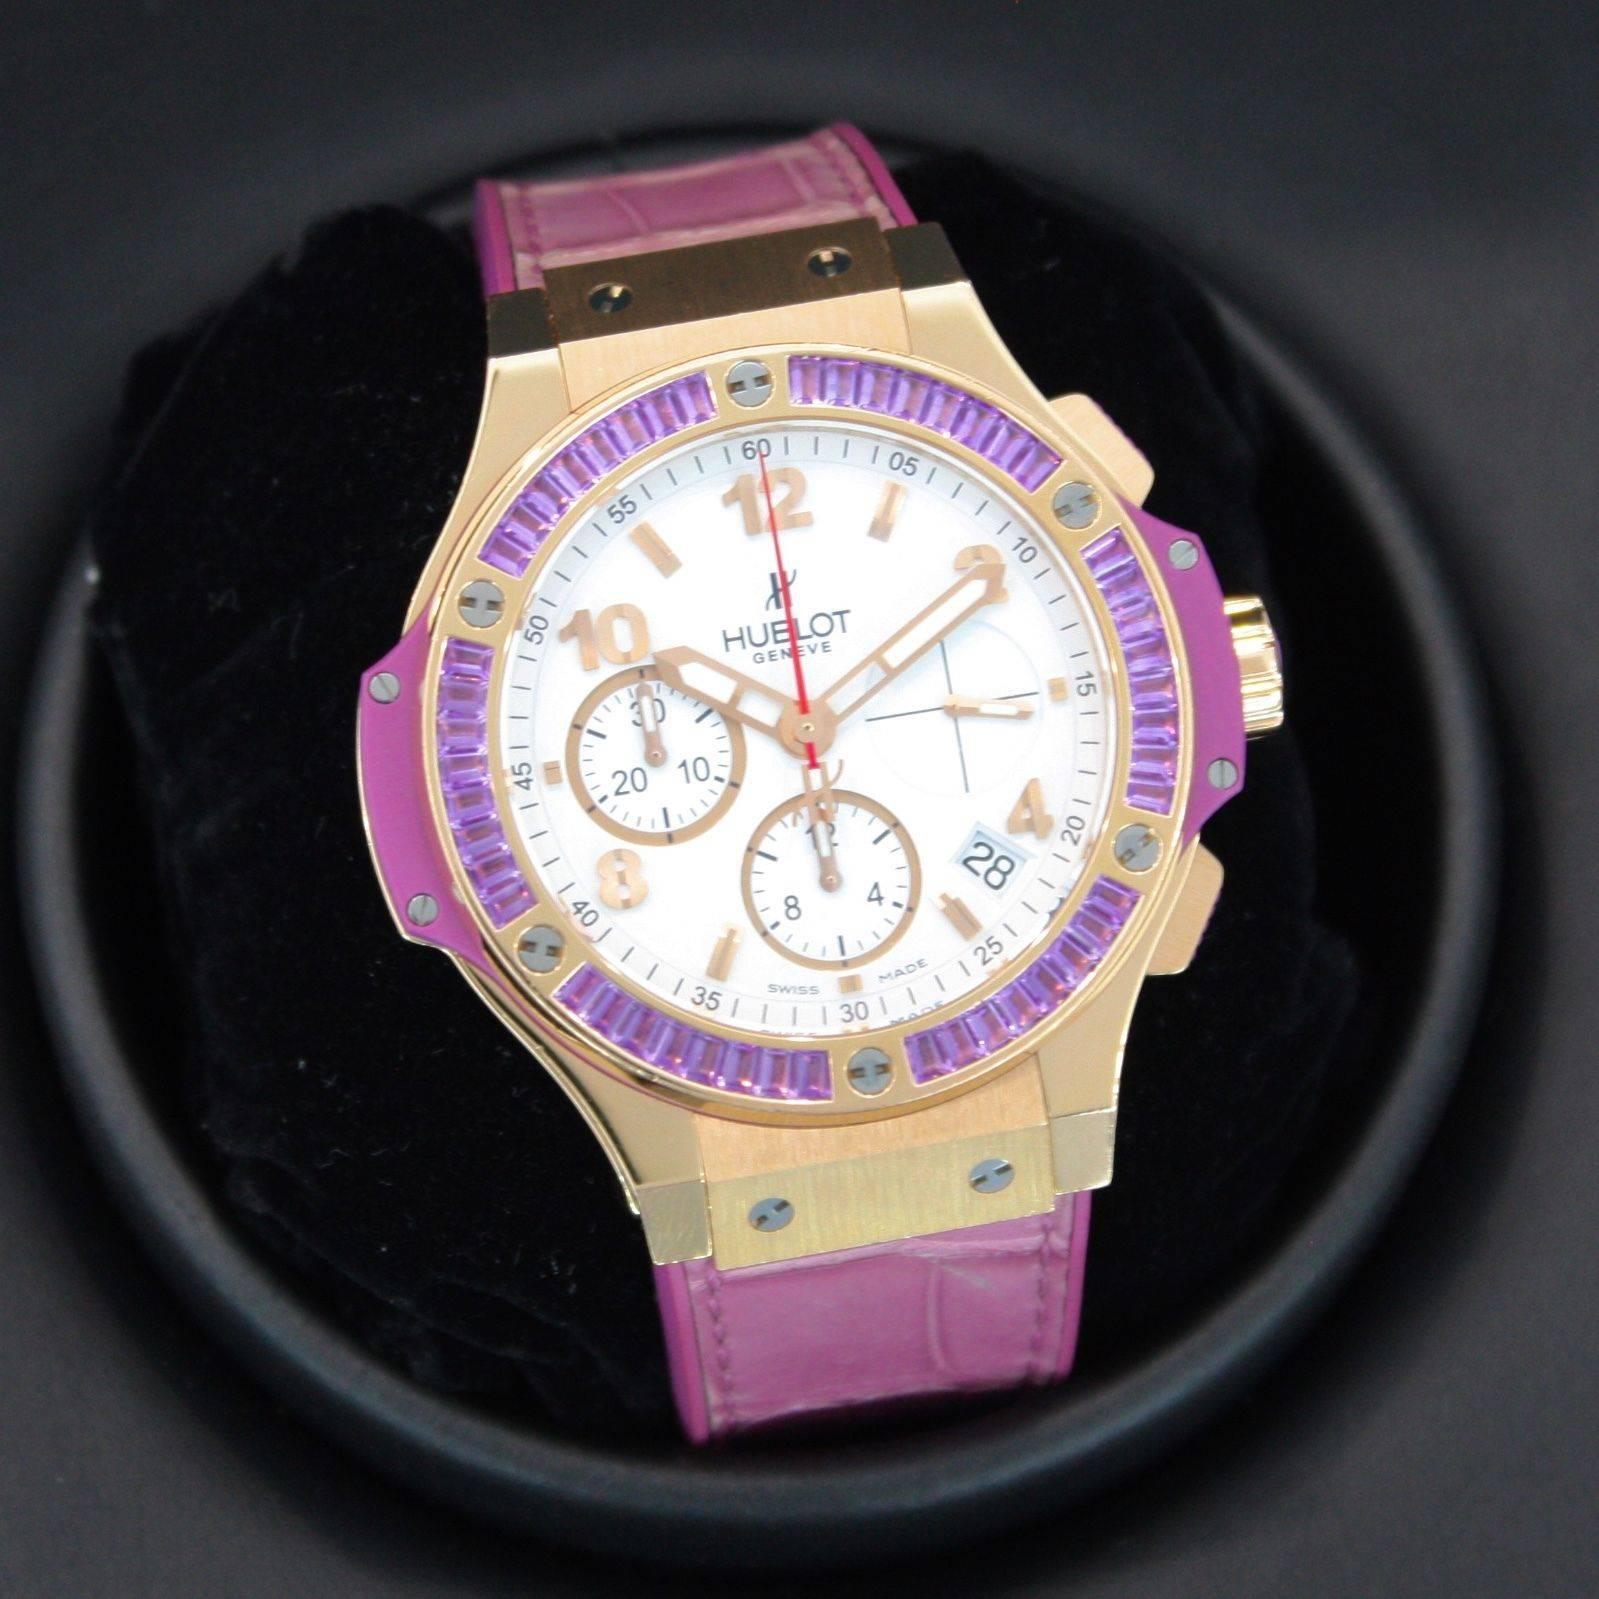 Brand Name: Hublot
Style Number: 341.PV.2010.LR.1905
Also Called: 341PV2010LR1905
Series: Big Bang Tutti Frutti Purple Amethyst 
Gender: Unisex
Case Material: 18k Rose Gold
Dial Color	: White
Movement: automatic
Engine: HUB4300
Functions	: